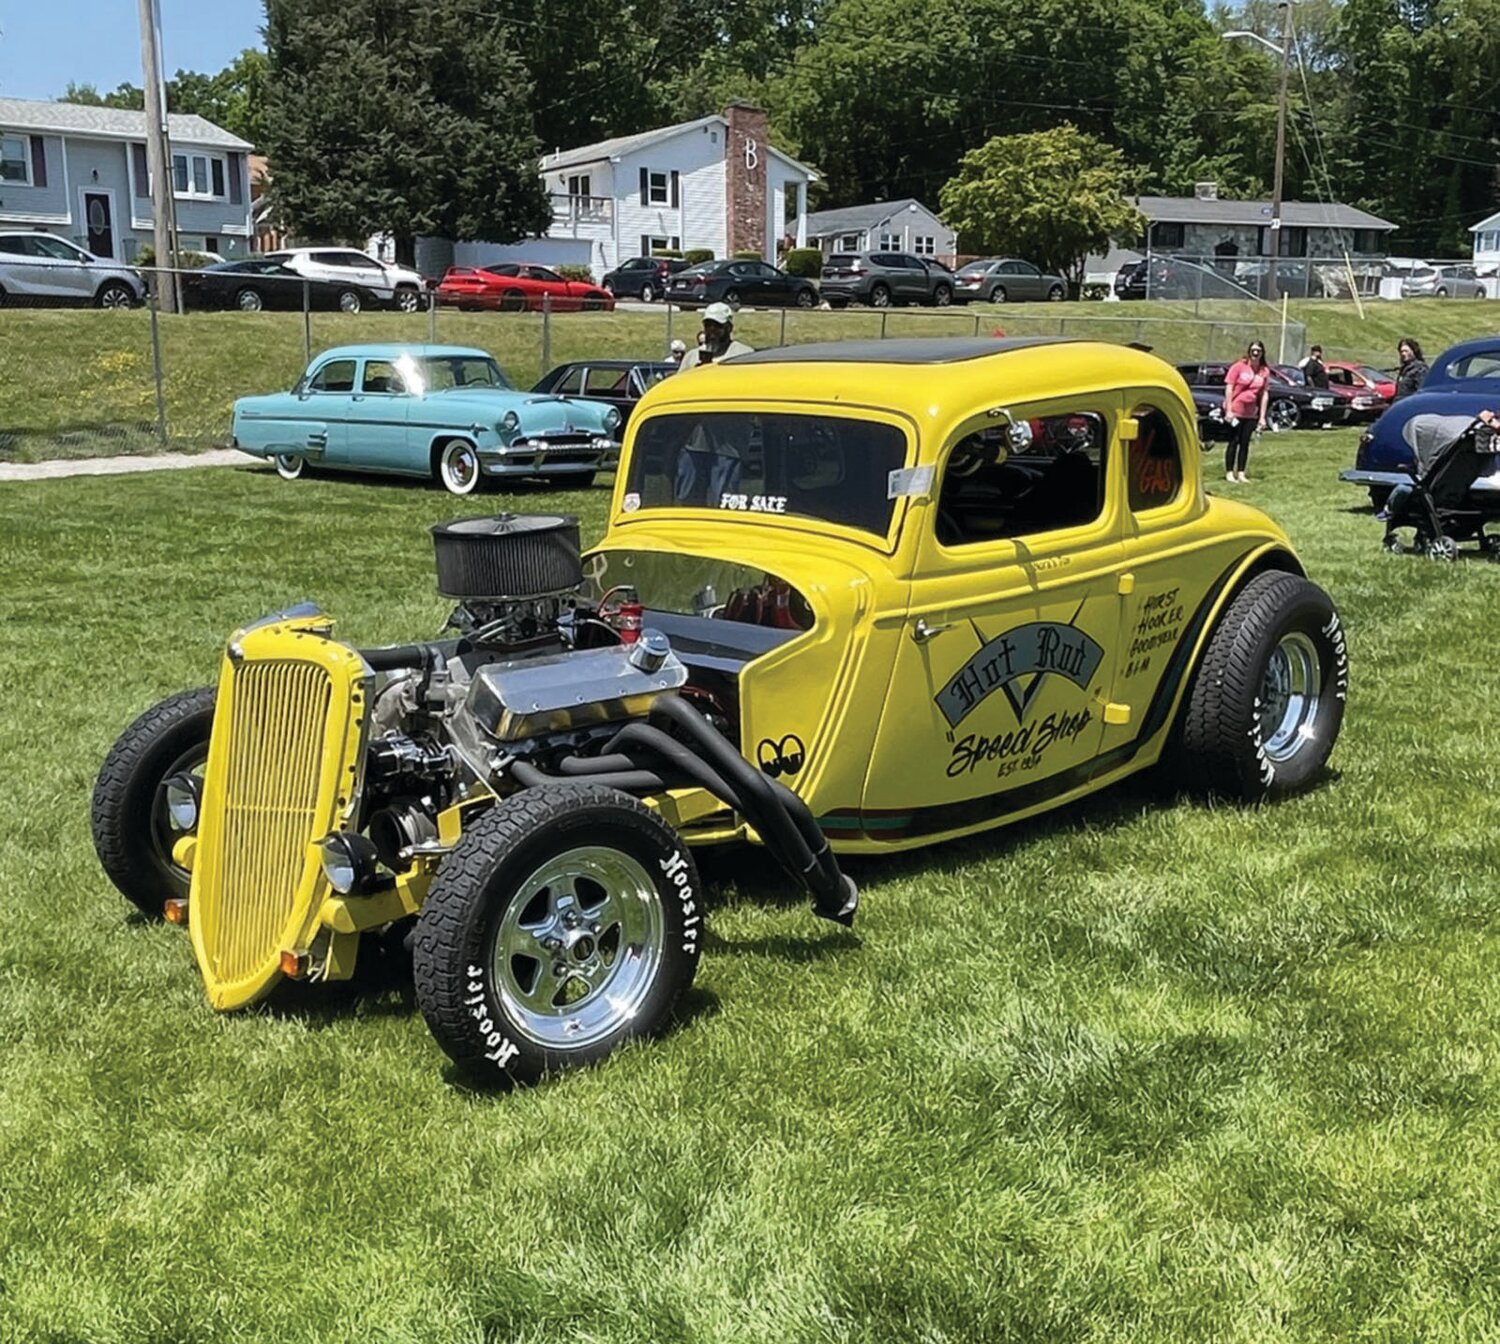 MIGHTY MACHINE: This is just one of the many roadsters that were on display Monday in Johnston.